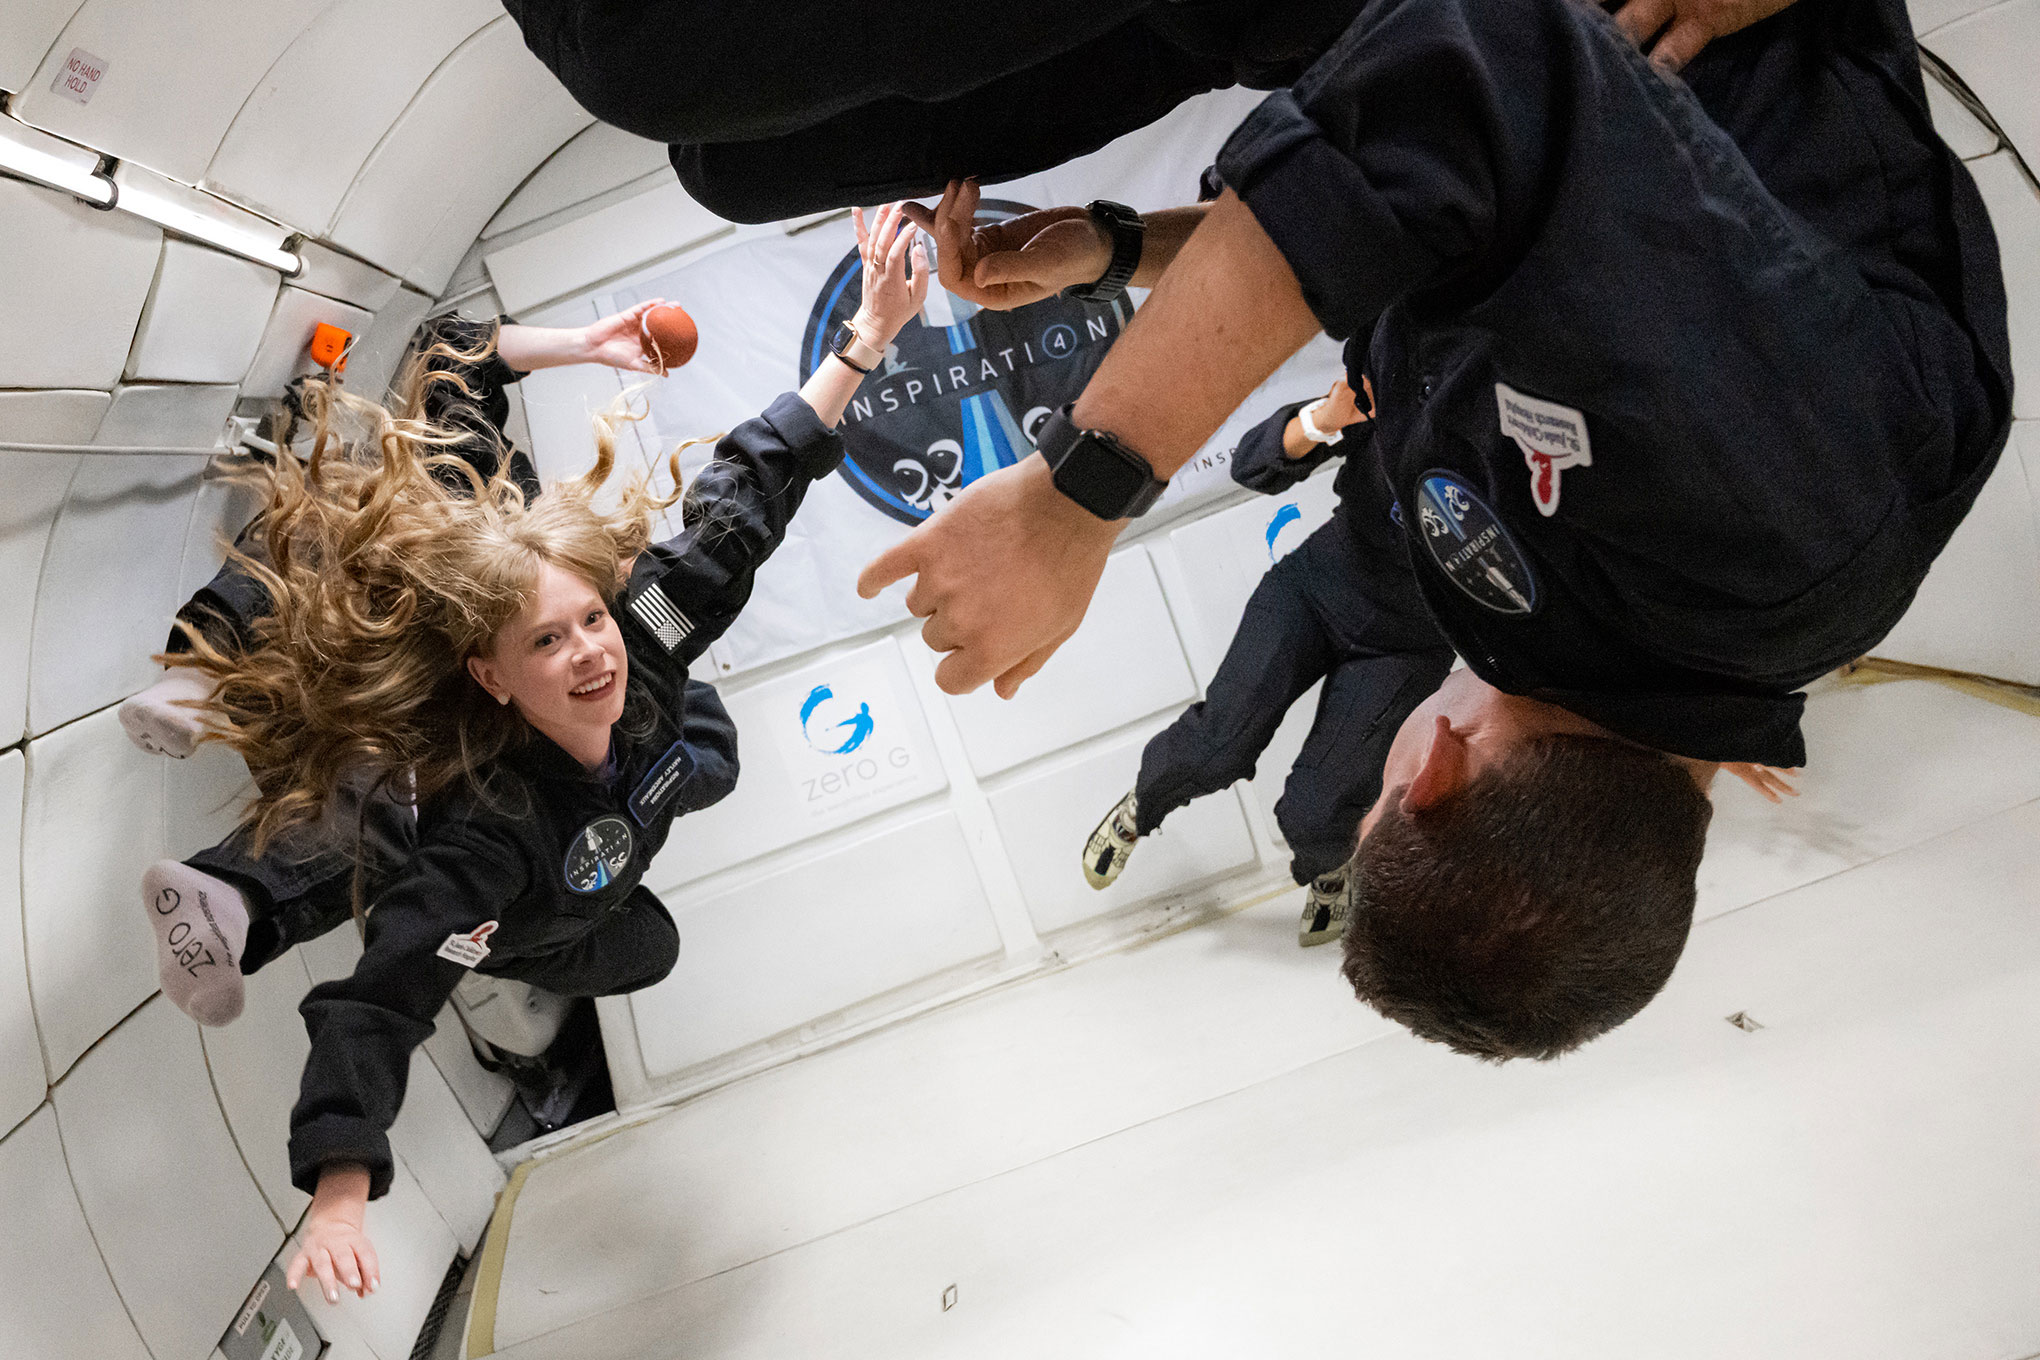 Hayley Arceneaux (left) and the rest of the Inspiration4 crew on a ZERO-G flight in Las Vegas on July 11, 2021. The plane flies in parabolic arcs to simulate zero gravity.